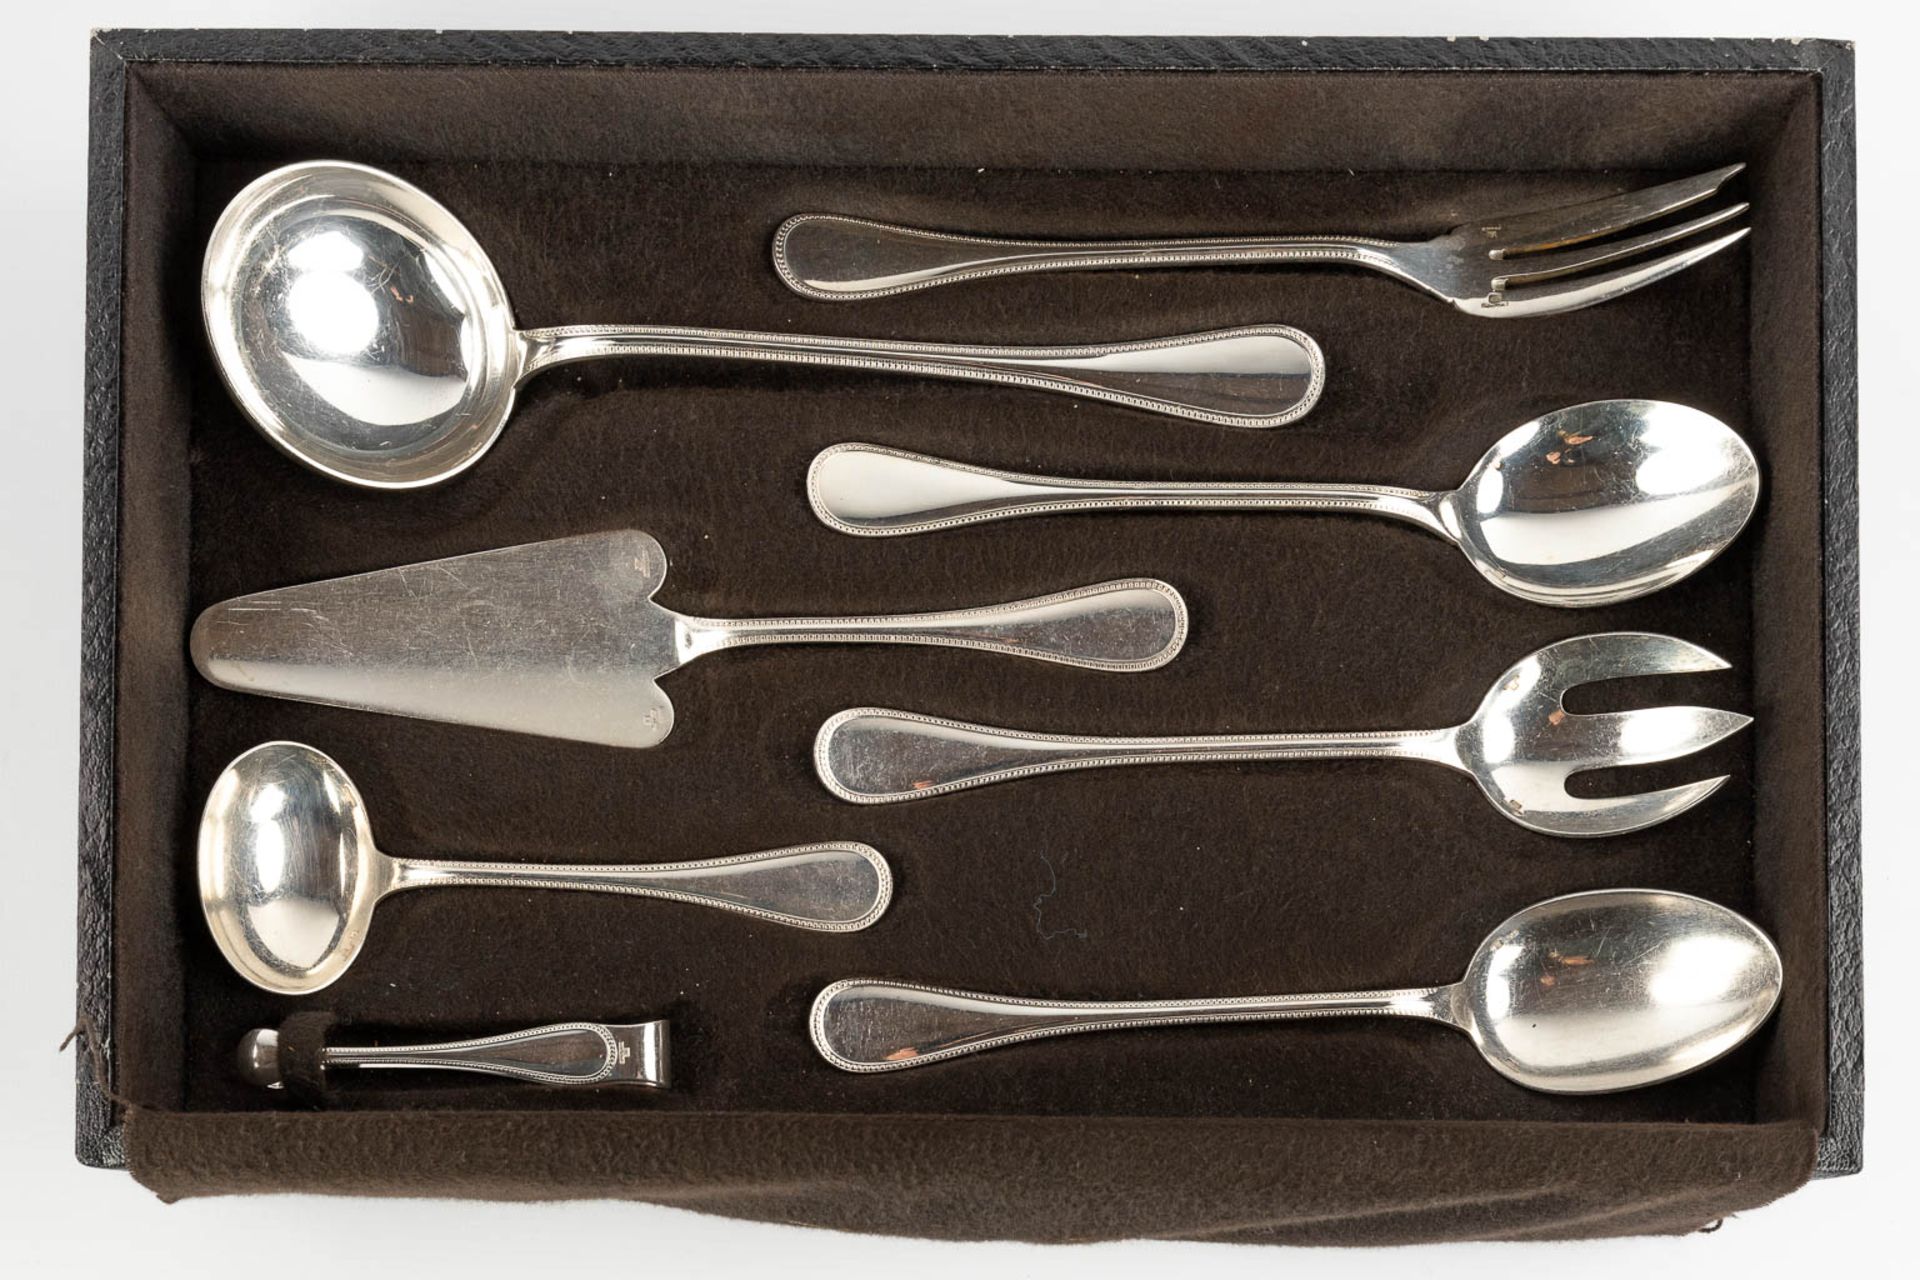 Christofle 'Perles' a large silver-plated cutlery in a storage box. 144 pieces. (D:29 x W:46 x H:33 - Image 21 of 21